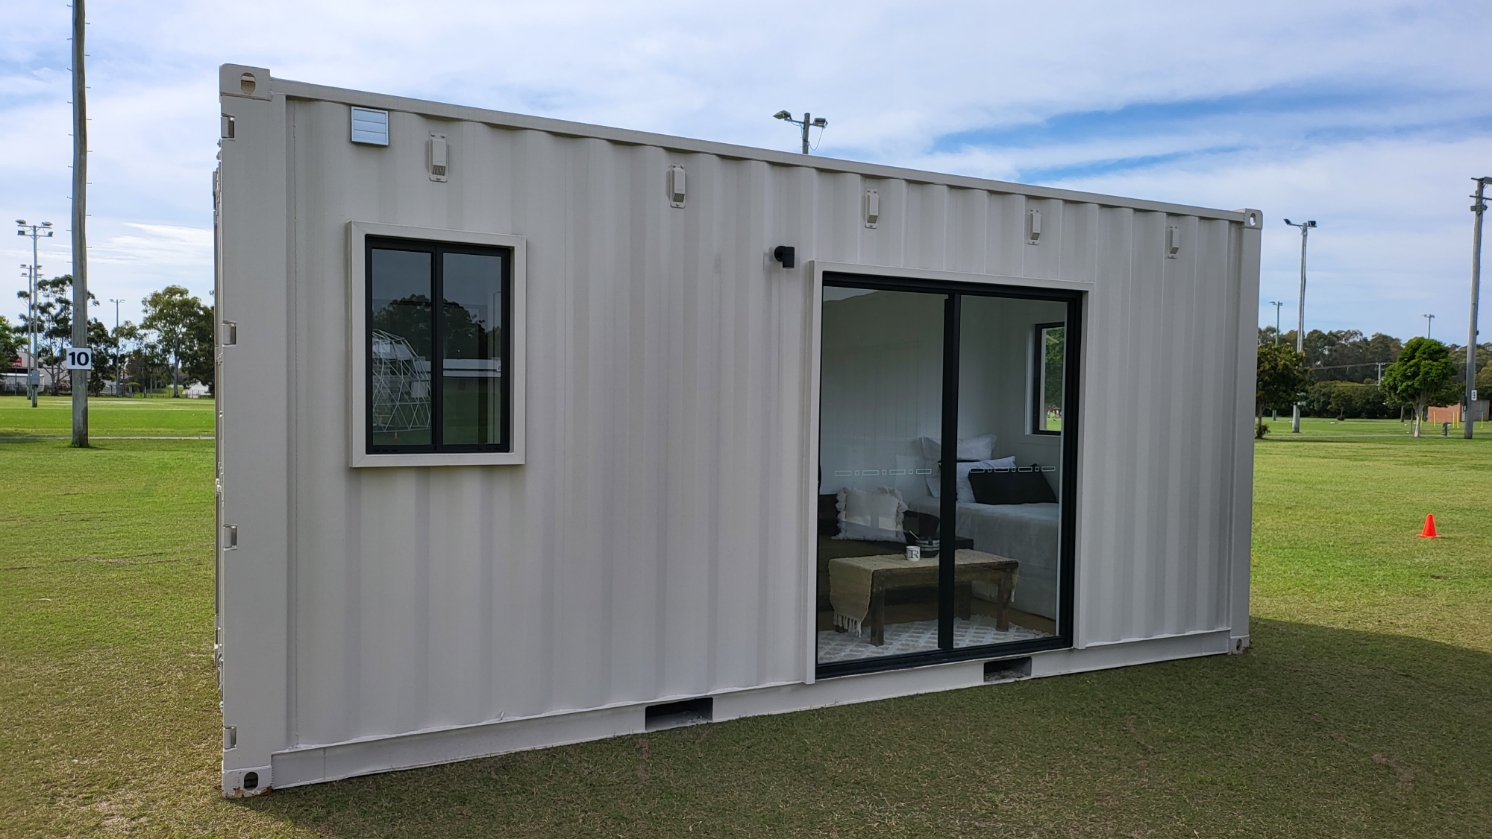 20ft 1Br portable container home_0756463729